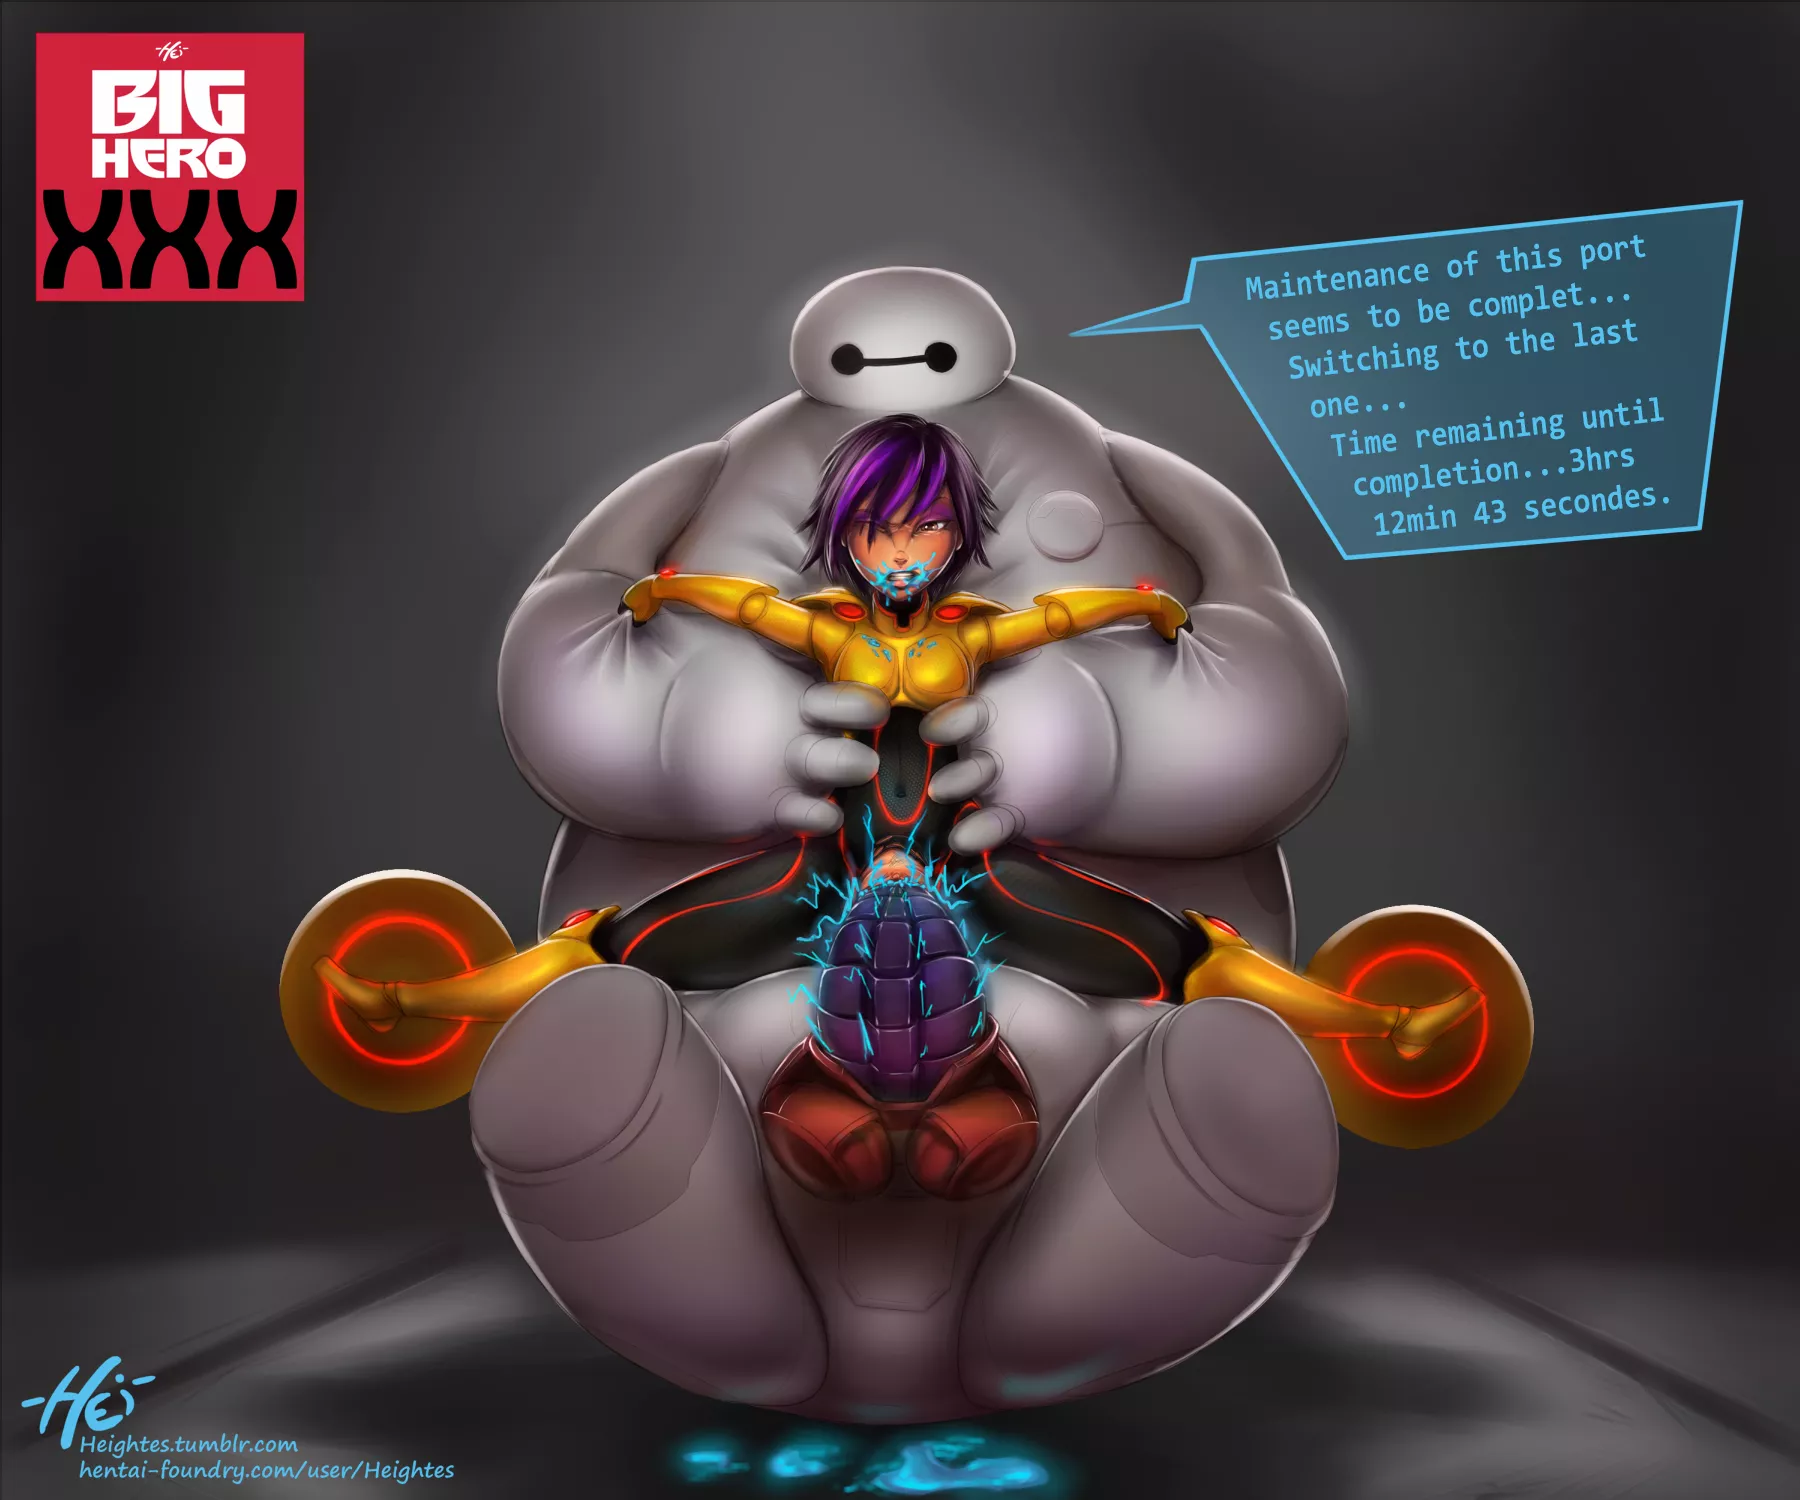 1800px x 1500px - Big Hero 6] Baymax And GoGo Tomago nudes : realrule34 | NUDE-PICS.ORG